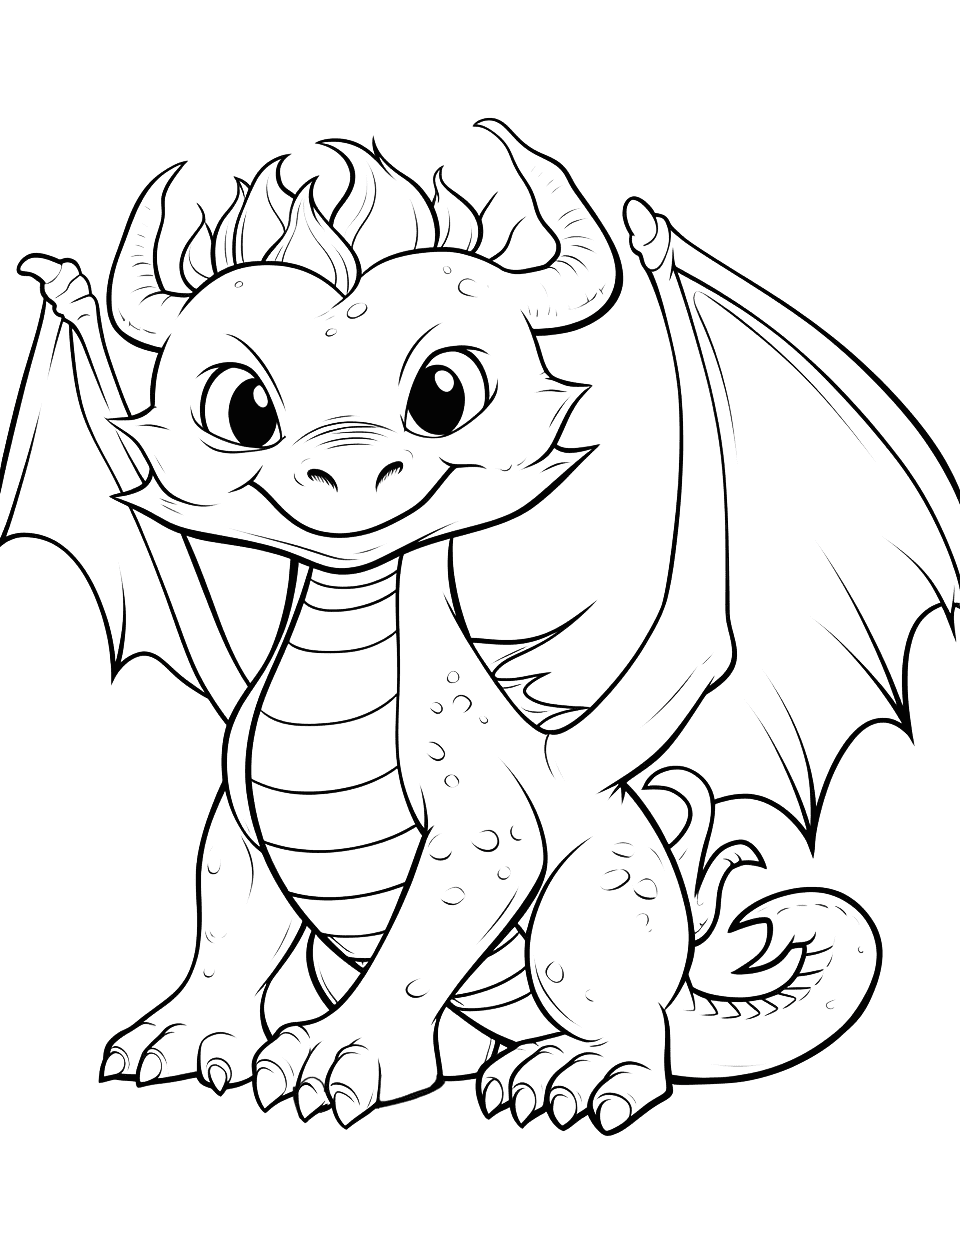 Easy Dragon Drawing Coloring Page - An easy-to-follow dragon drawing, perfect for beginners.